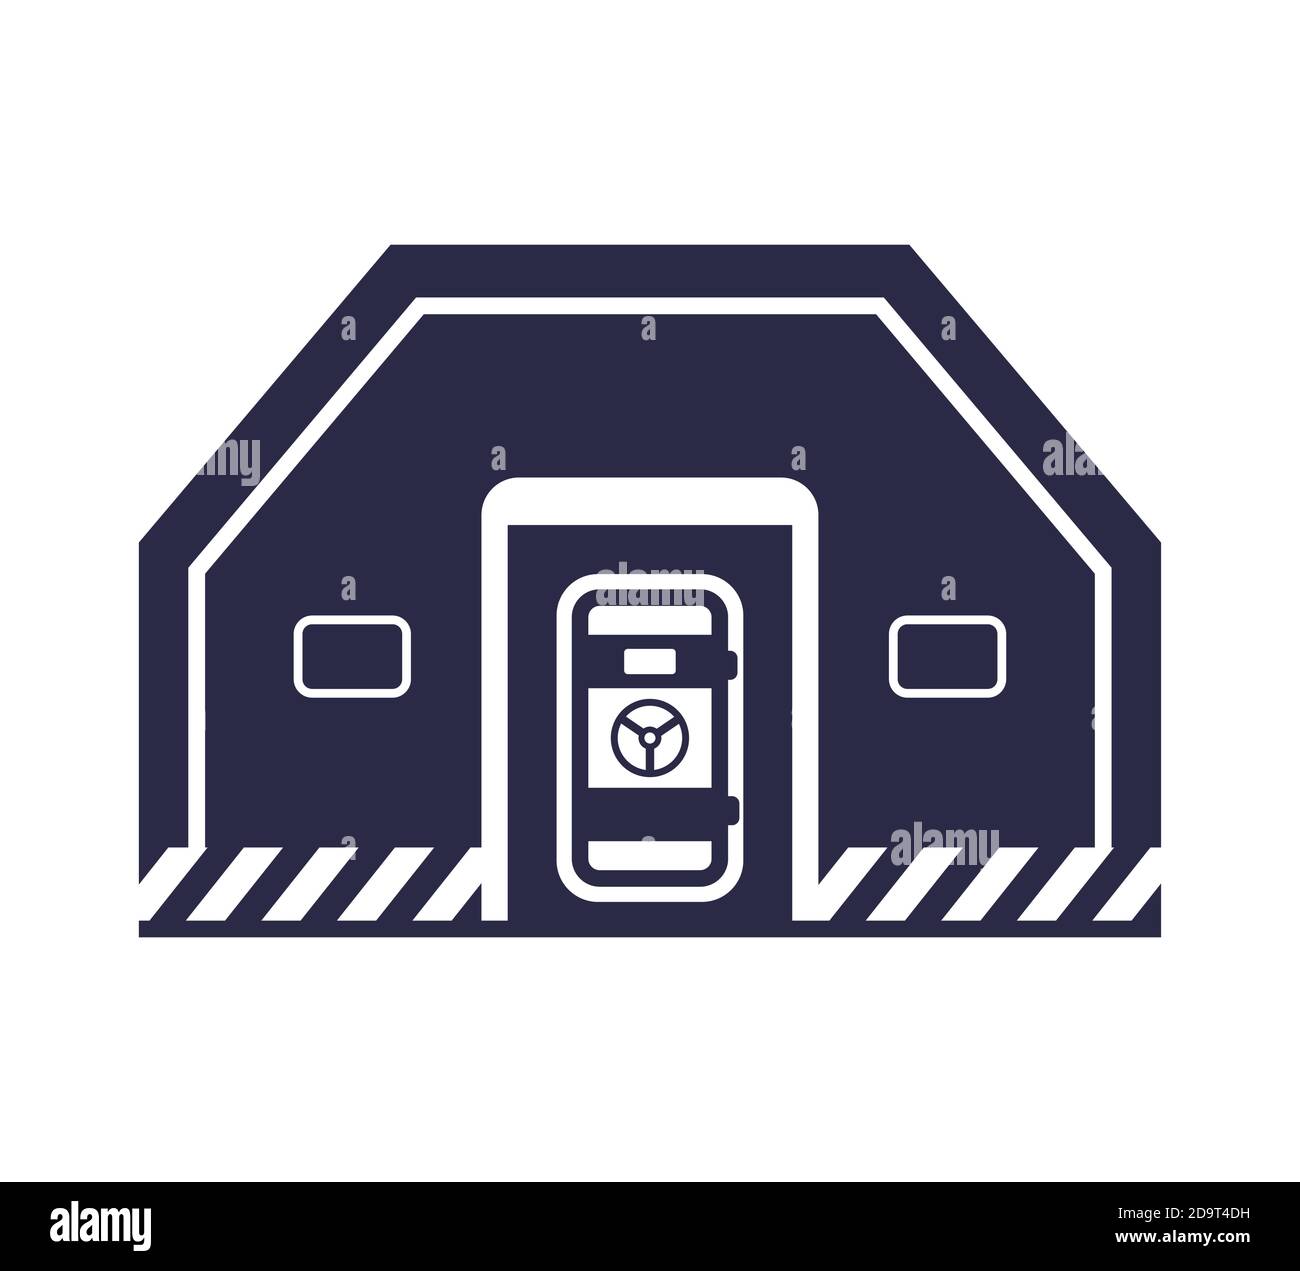 bunker black icon. image of a bomb shelter on a white background. flat vector illustration. Stock Vector